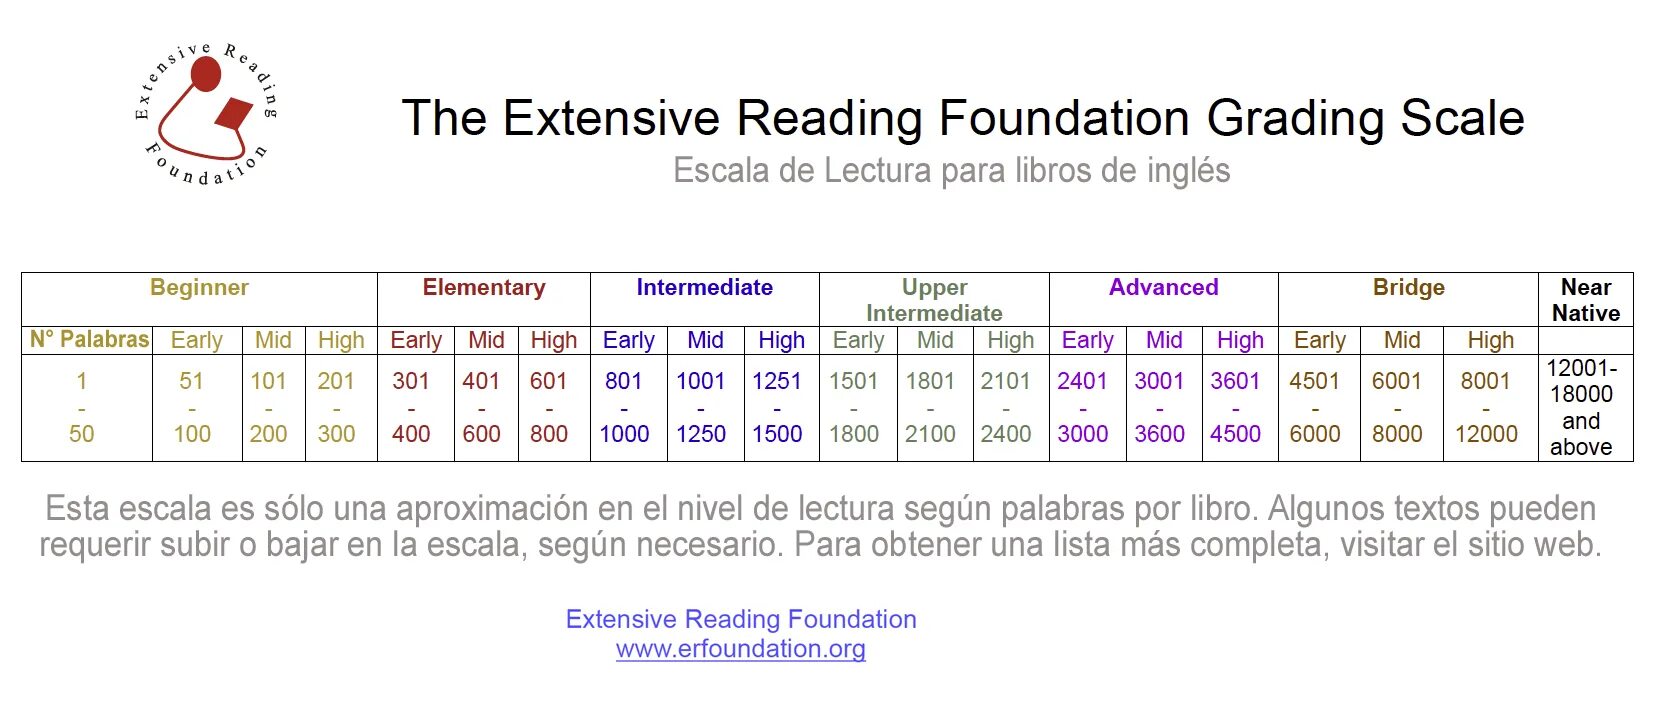 Oxford Graded Readers. English Level Scale. Graded Readers Intermediate. Graded Readers b1. Reading in levels